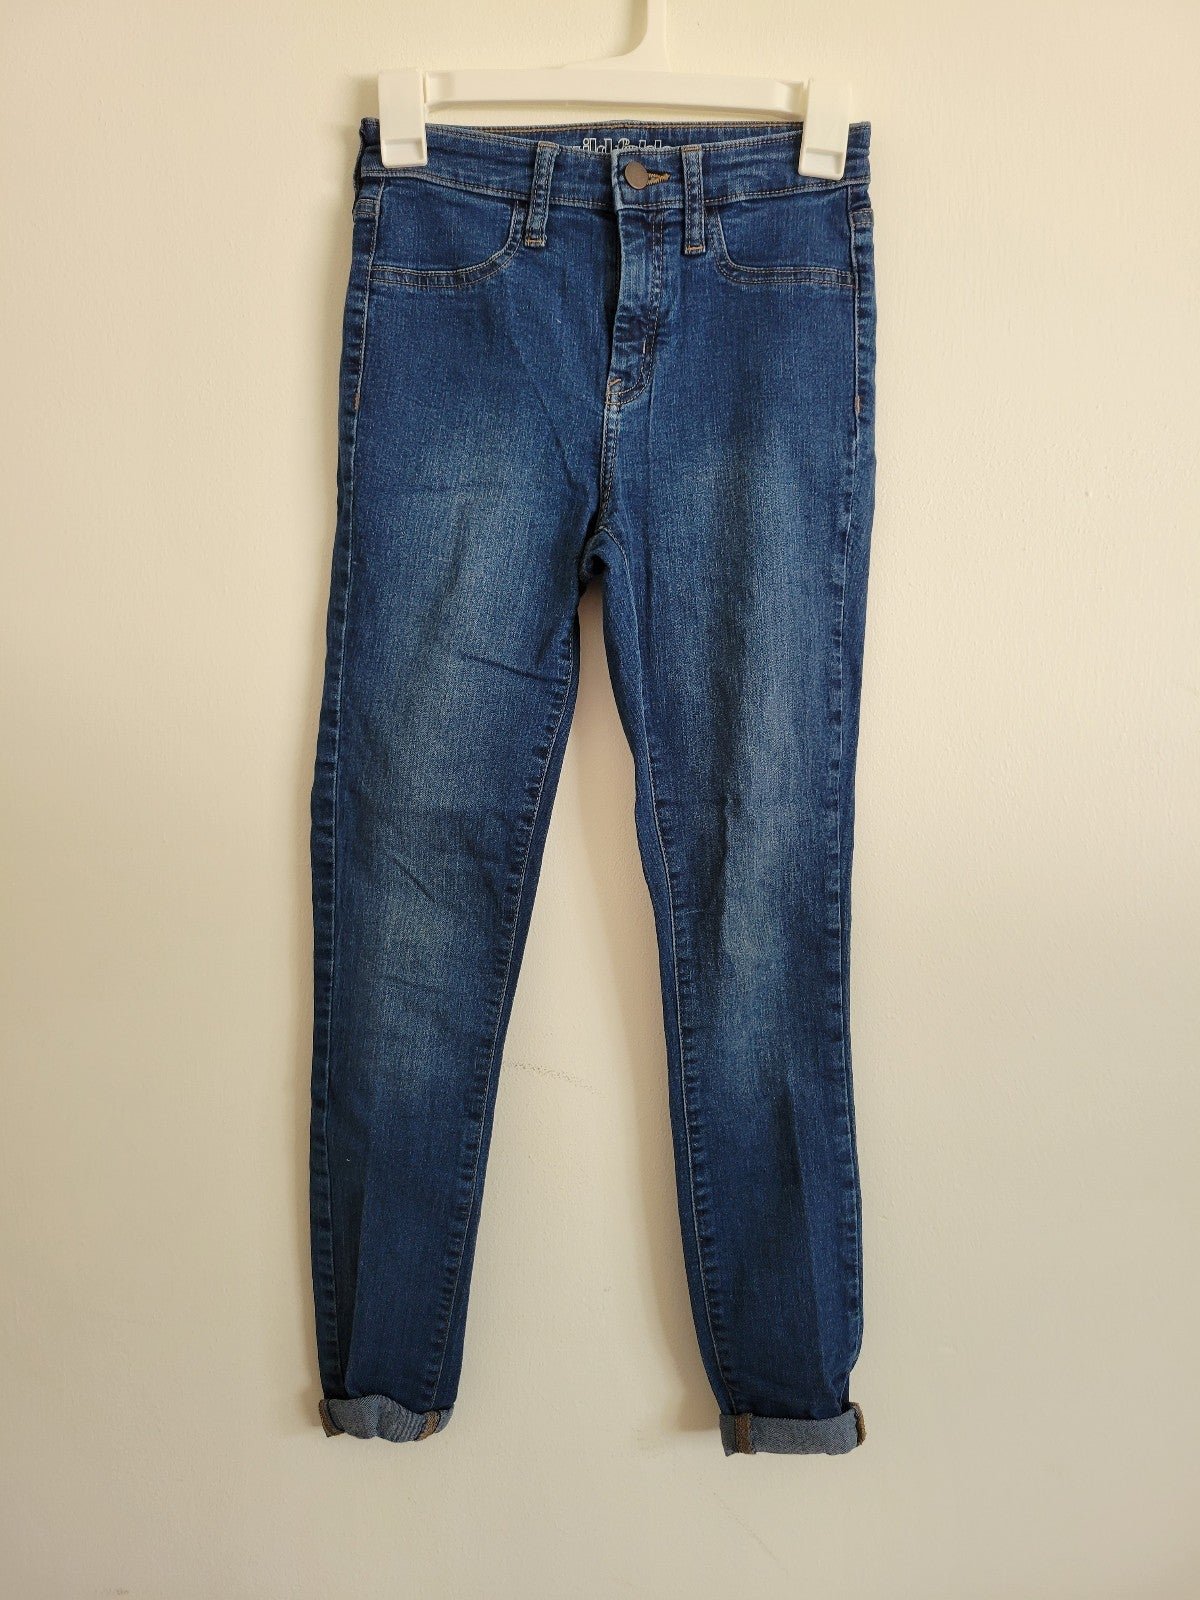 The Best Seller Wild fable jeans IBCVrhoFK Outlet Store